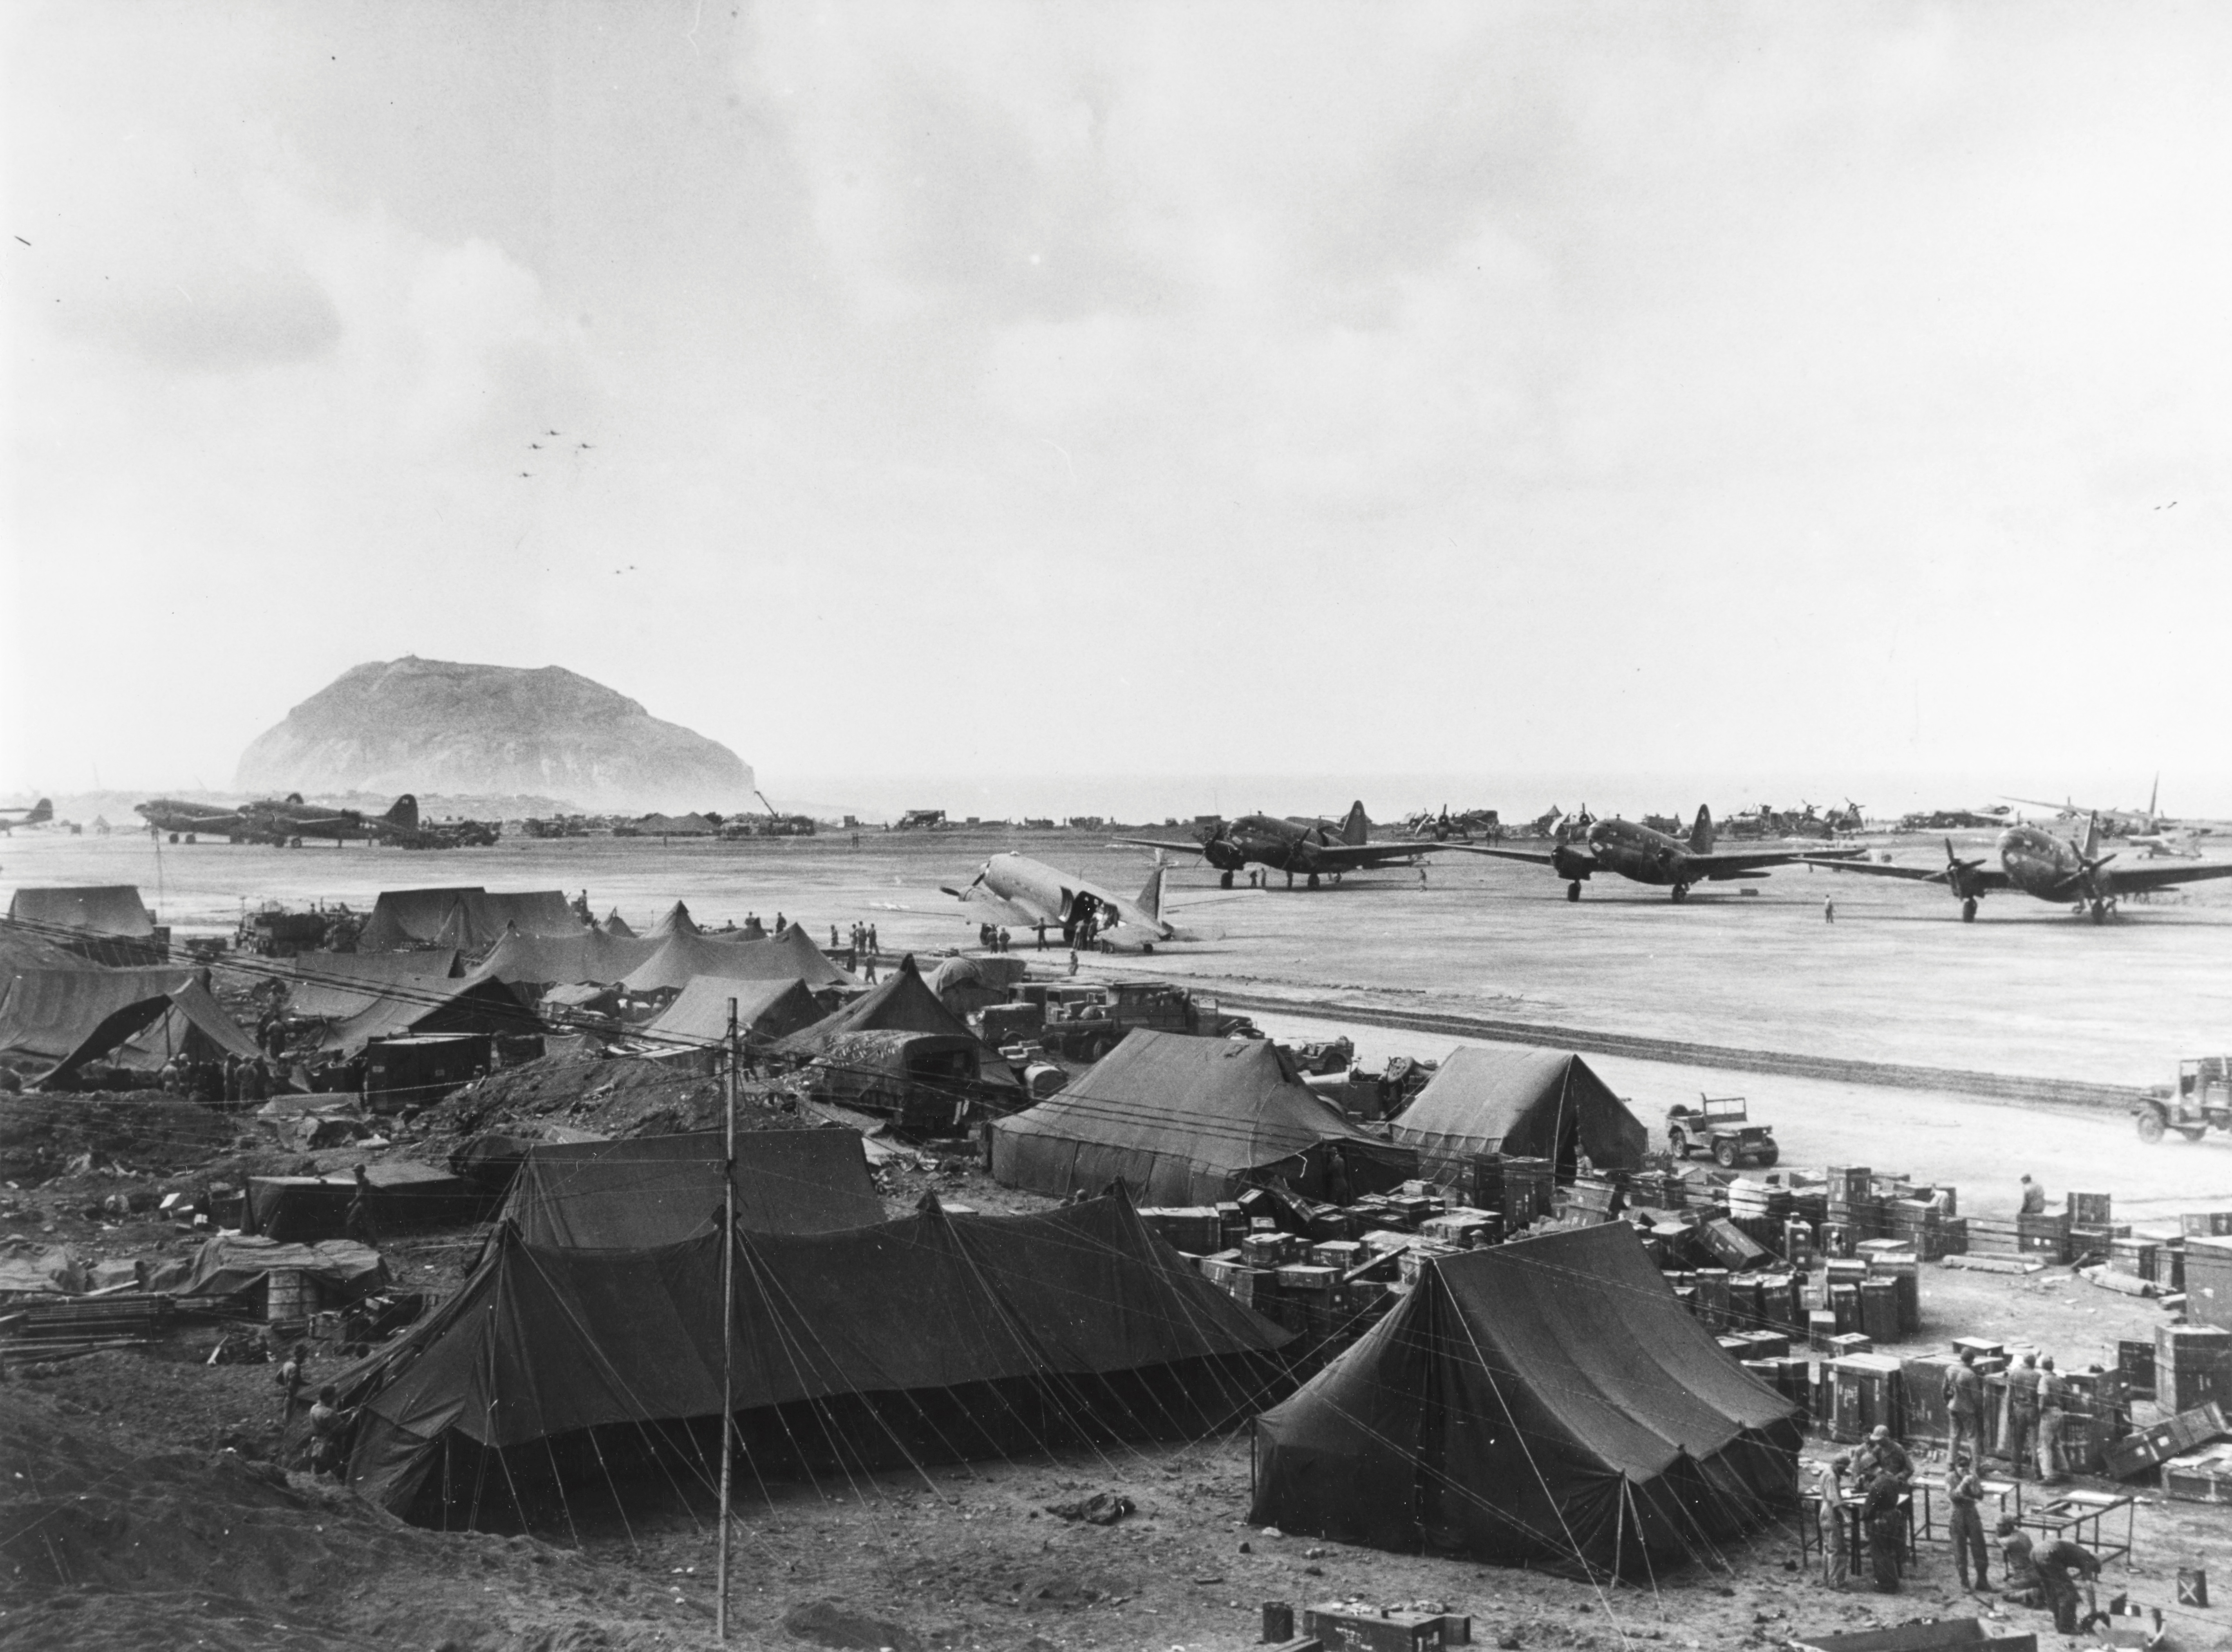 A Douglas R4D (C-47) transport plane (center) loading wounded Marines on Iwo Jima's South Field bound for a Navy hospital on Guam, Mar 1945. Note Mount Suribachi to the left.